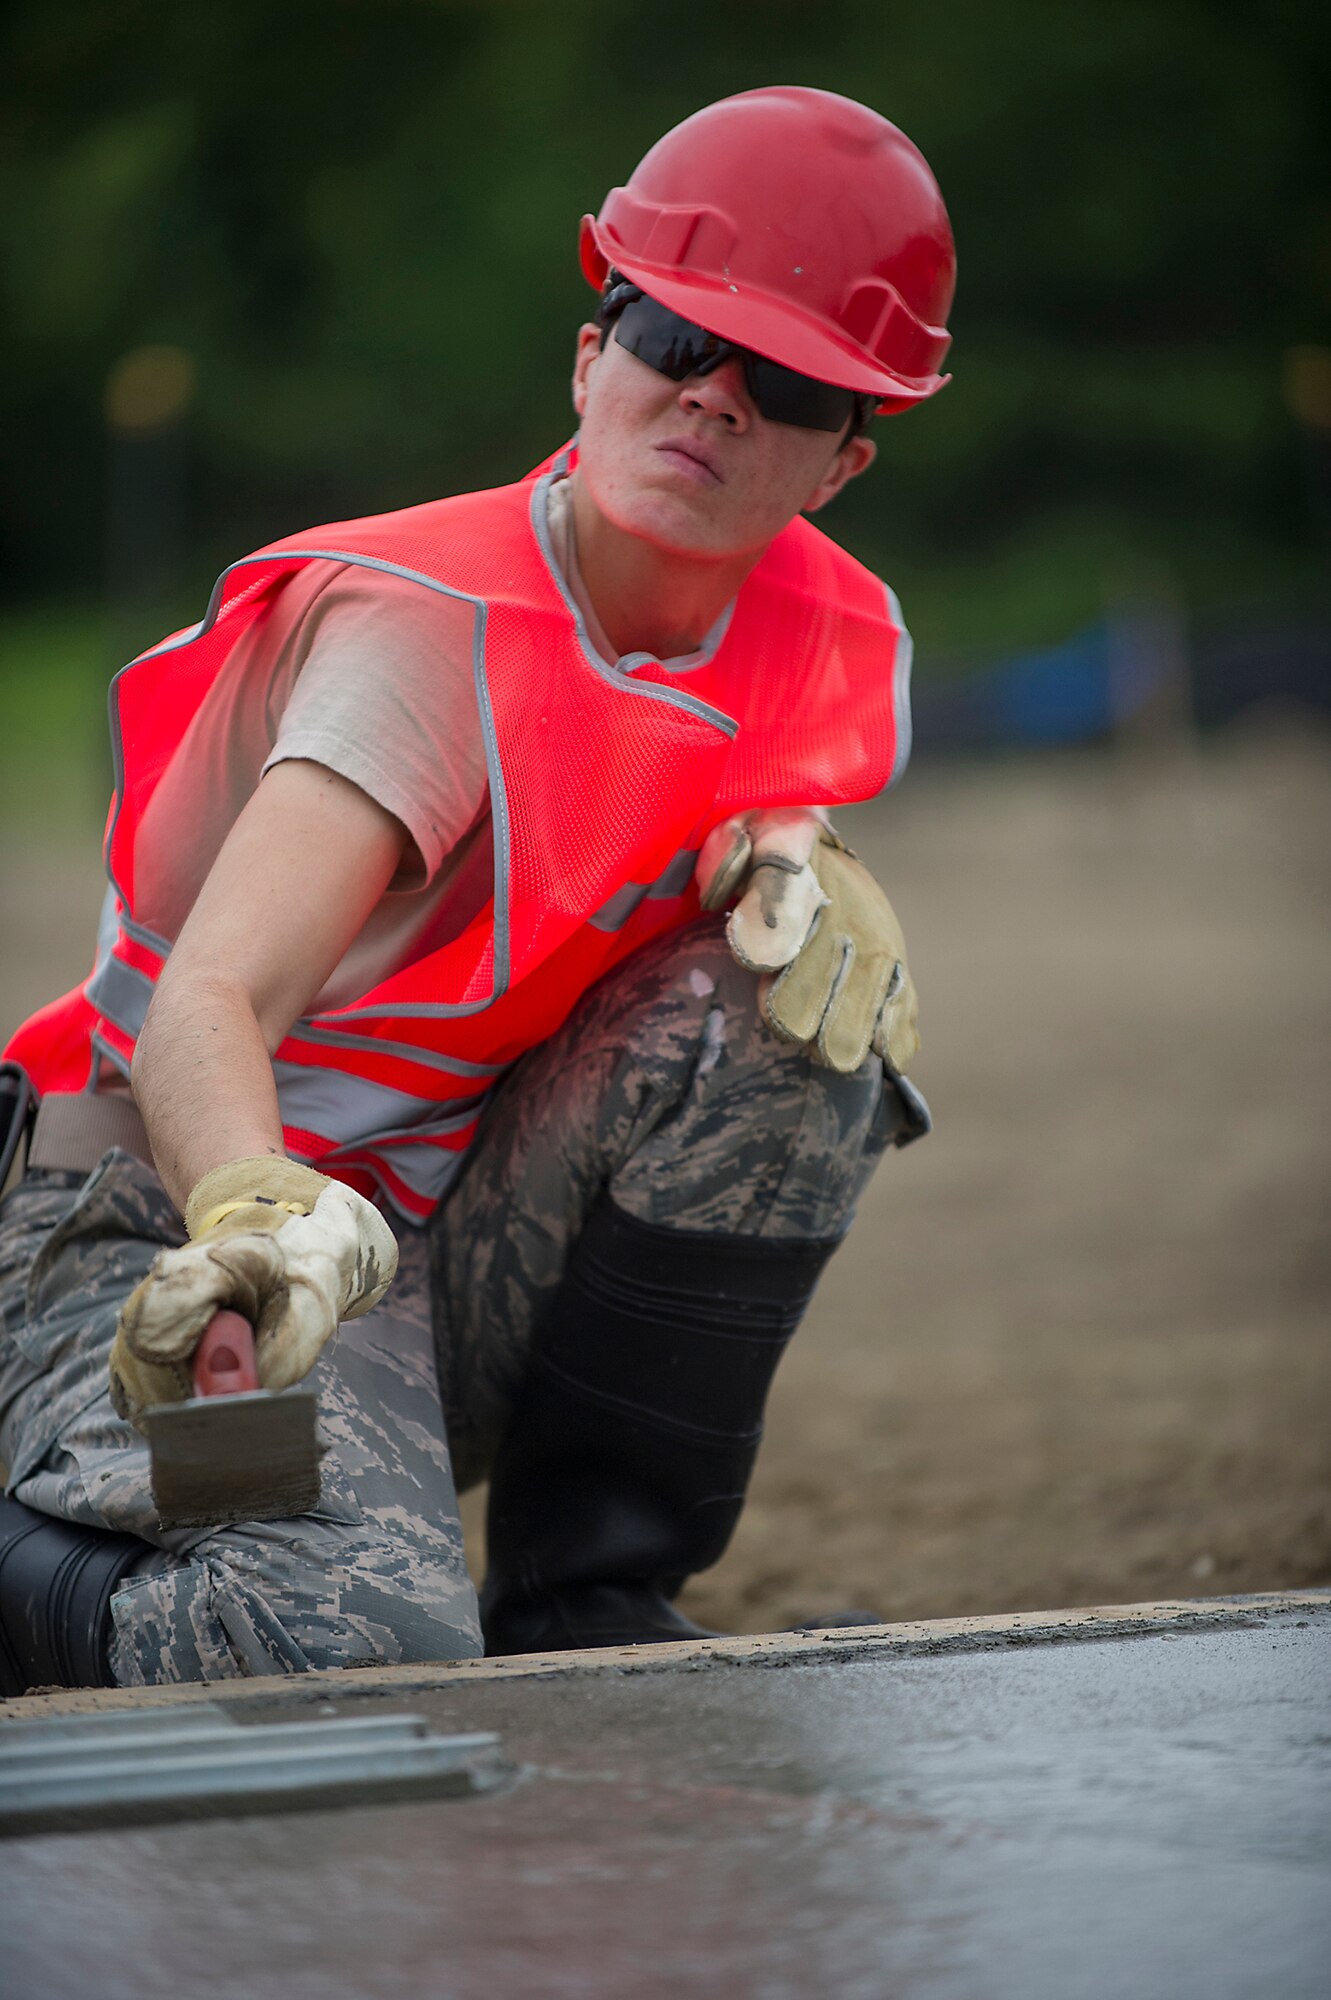 Senior Airman Natalie Guzman, 560th RED HORSE Squadron at Joing  Base Charleston, South Carolina, uses a float to smooth a concrete foundation during a construction project at Joint Base Charleston.  Members of the 560th RHS, 628th Civil Engineer Squadron at Joint Base Charleston, 556th RHS, 555th RHS from Nellis Air Force Base, Nevada, and 567th RHS from Seymour Johnson Air Force Base, North Carolina joined forces June, July and August at Joint Base Charleston to build a 4,800 square-foot preengineered  building building to store 560th RHS construction equipment and gear.  Rapid Engineer Deployable, Heavy Operational Repair Squadron, Engineer (RED HORSE) squadrons provide the Air Force with a highly mobile civil engineering capability in support of contingency and special operations worldwide. They are self-sufficient, mobile squadrons that provide heavy construction support such as runway/facility construction, electrical upgrades, and equipment transport when requirements exceed normal base civil engineer capabilities and where Army engineer support is not readily available. (U.S. Air Force Photo by Michael Dukes)